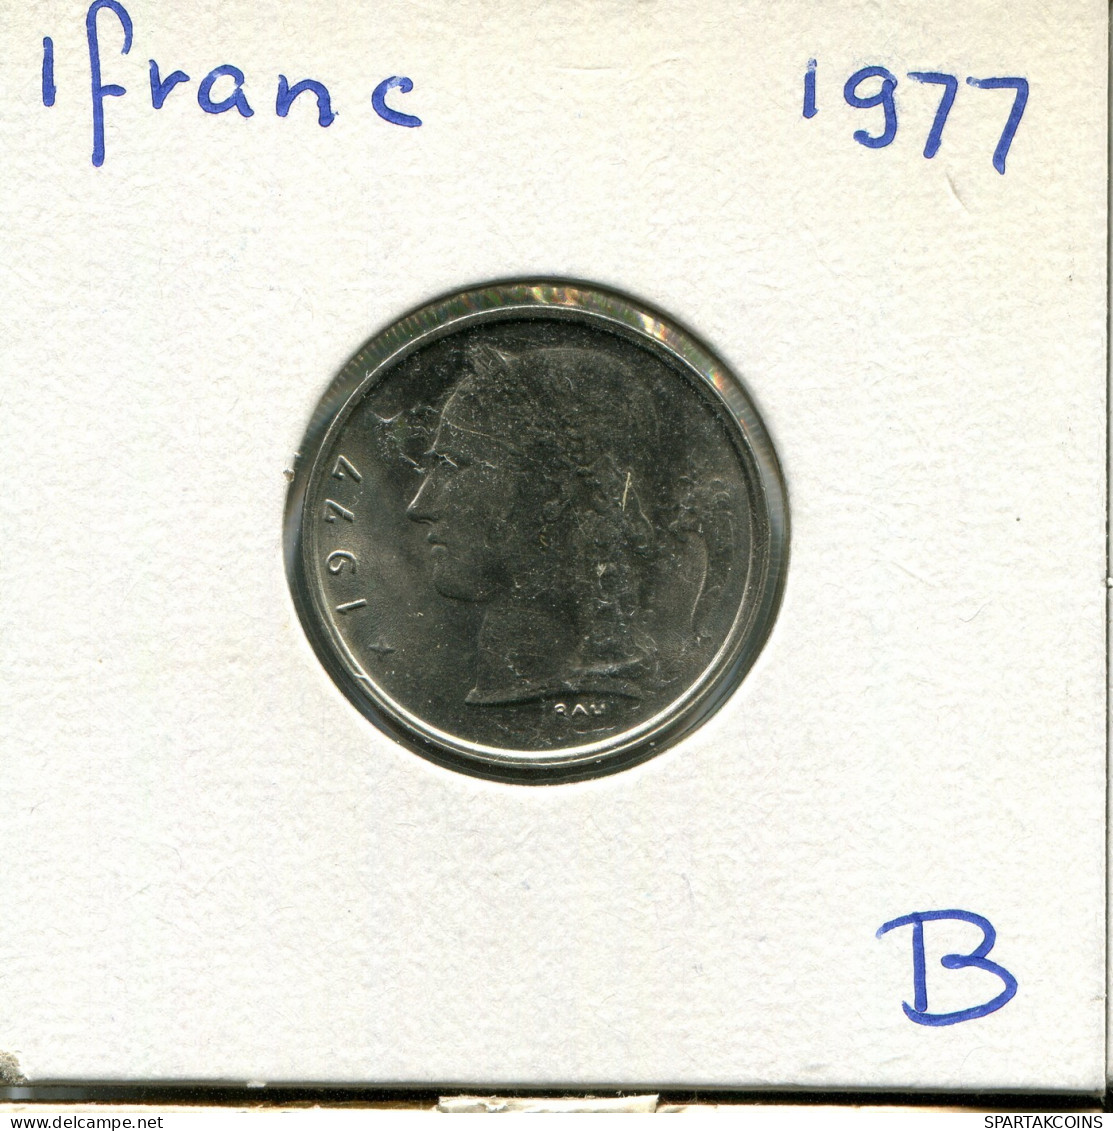 1 FRANC 1977 FRENCH Text BELGIUM Coin #AW901.U.A - 1 Franc